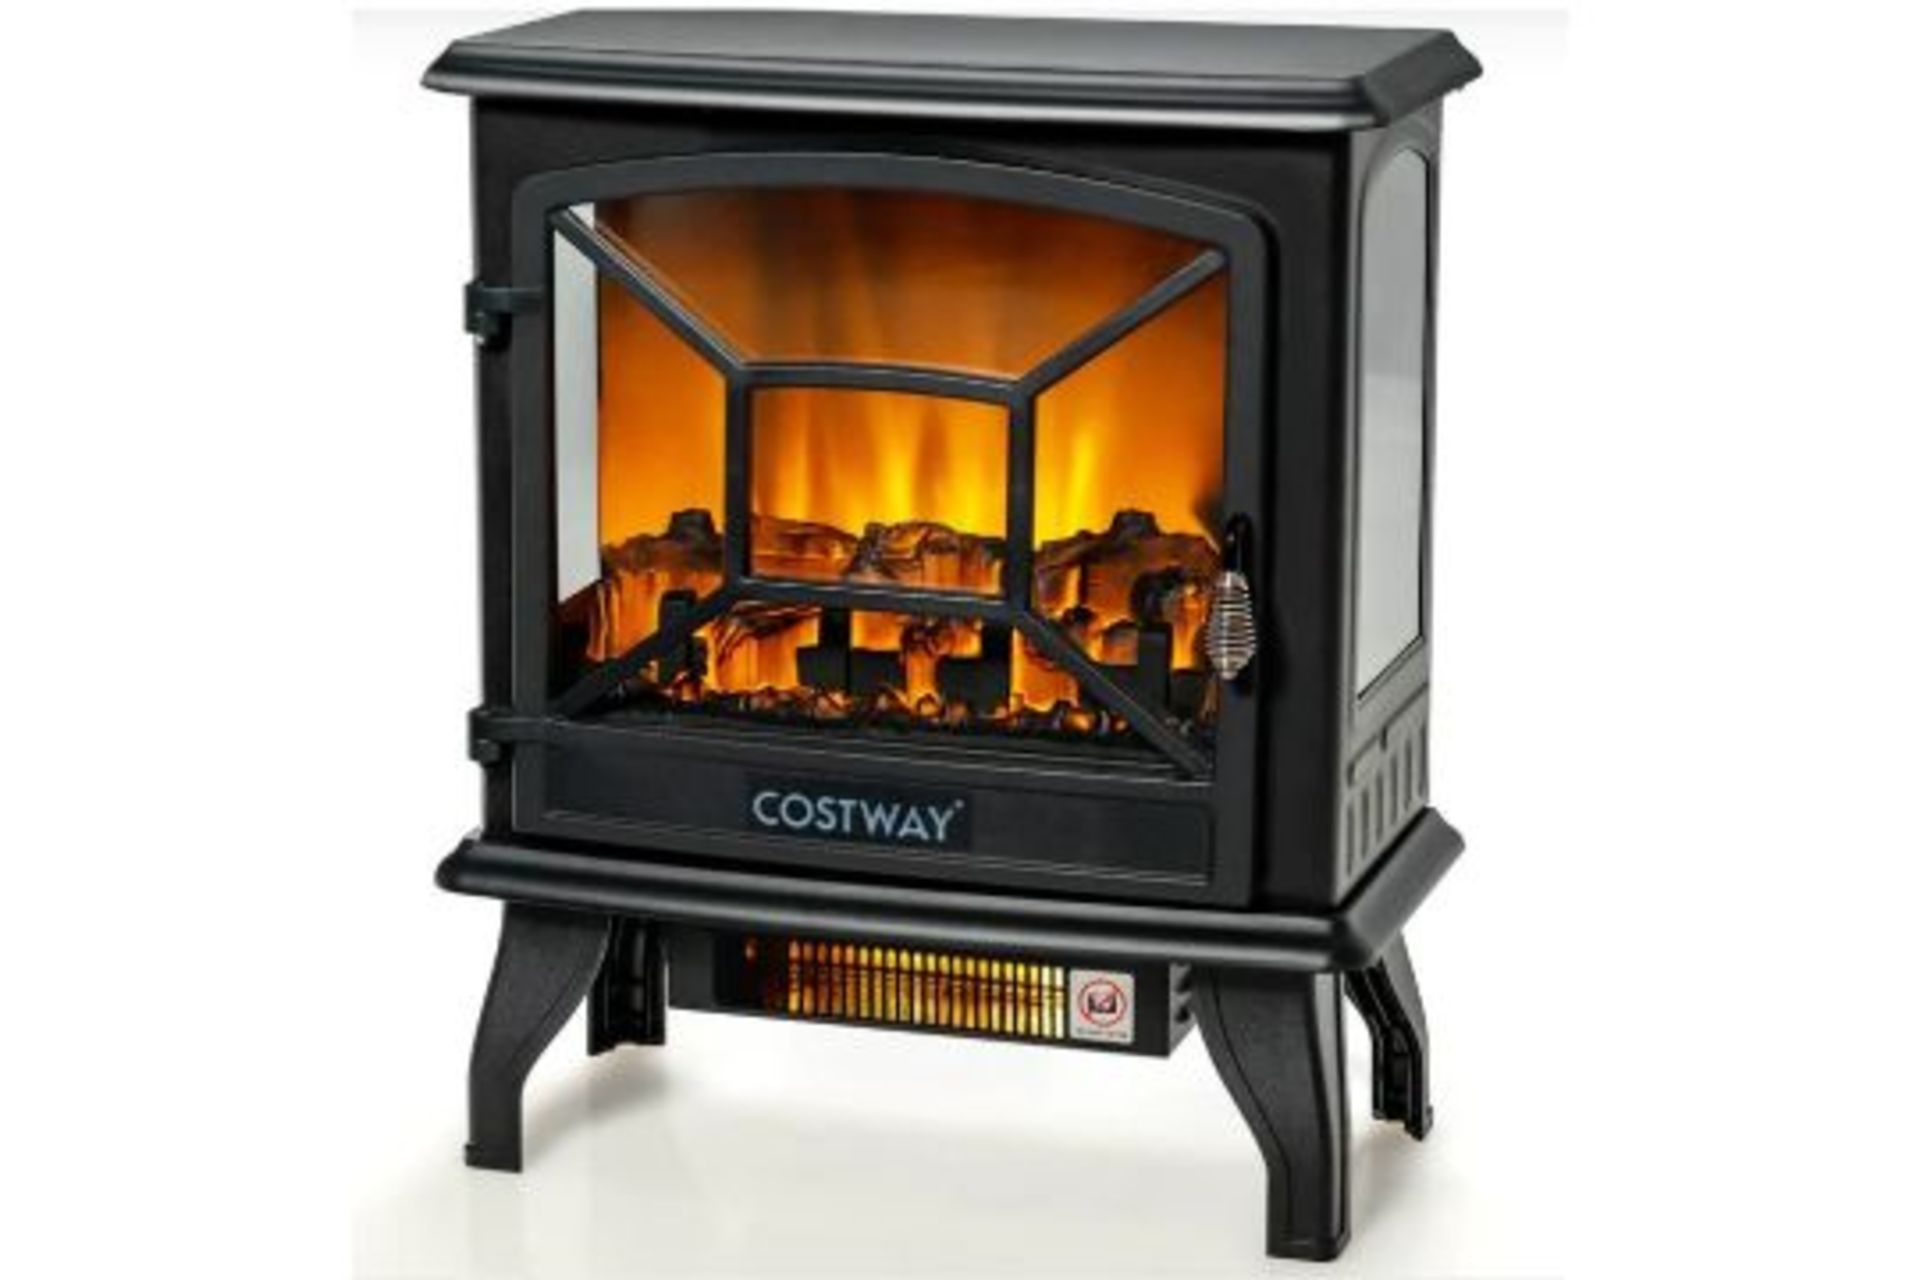 1800W FREESTANDING INDOOR ELECTRIC SPACE HEATER-BLACK. - R14.2. This freestanding fireplace will